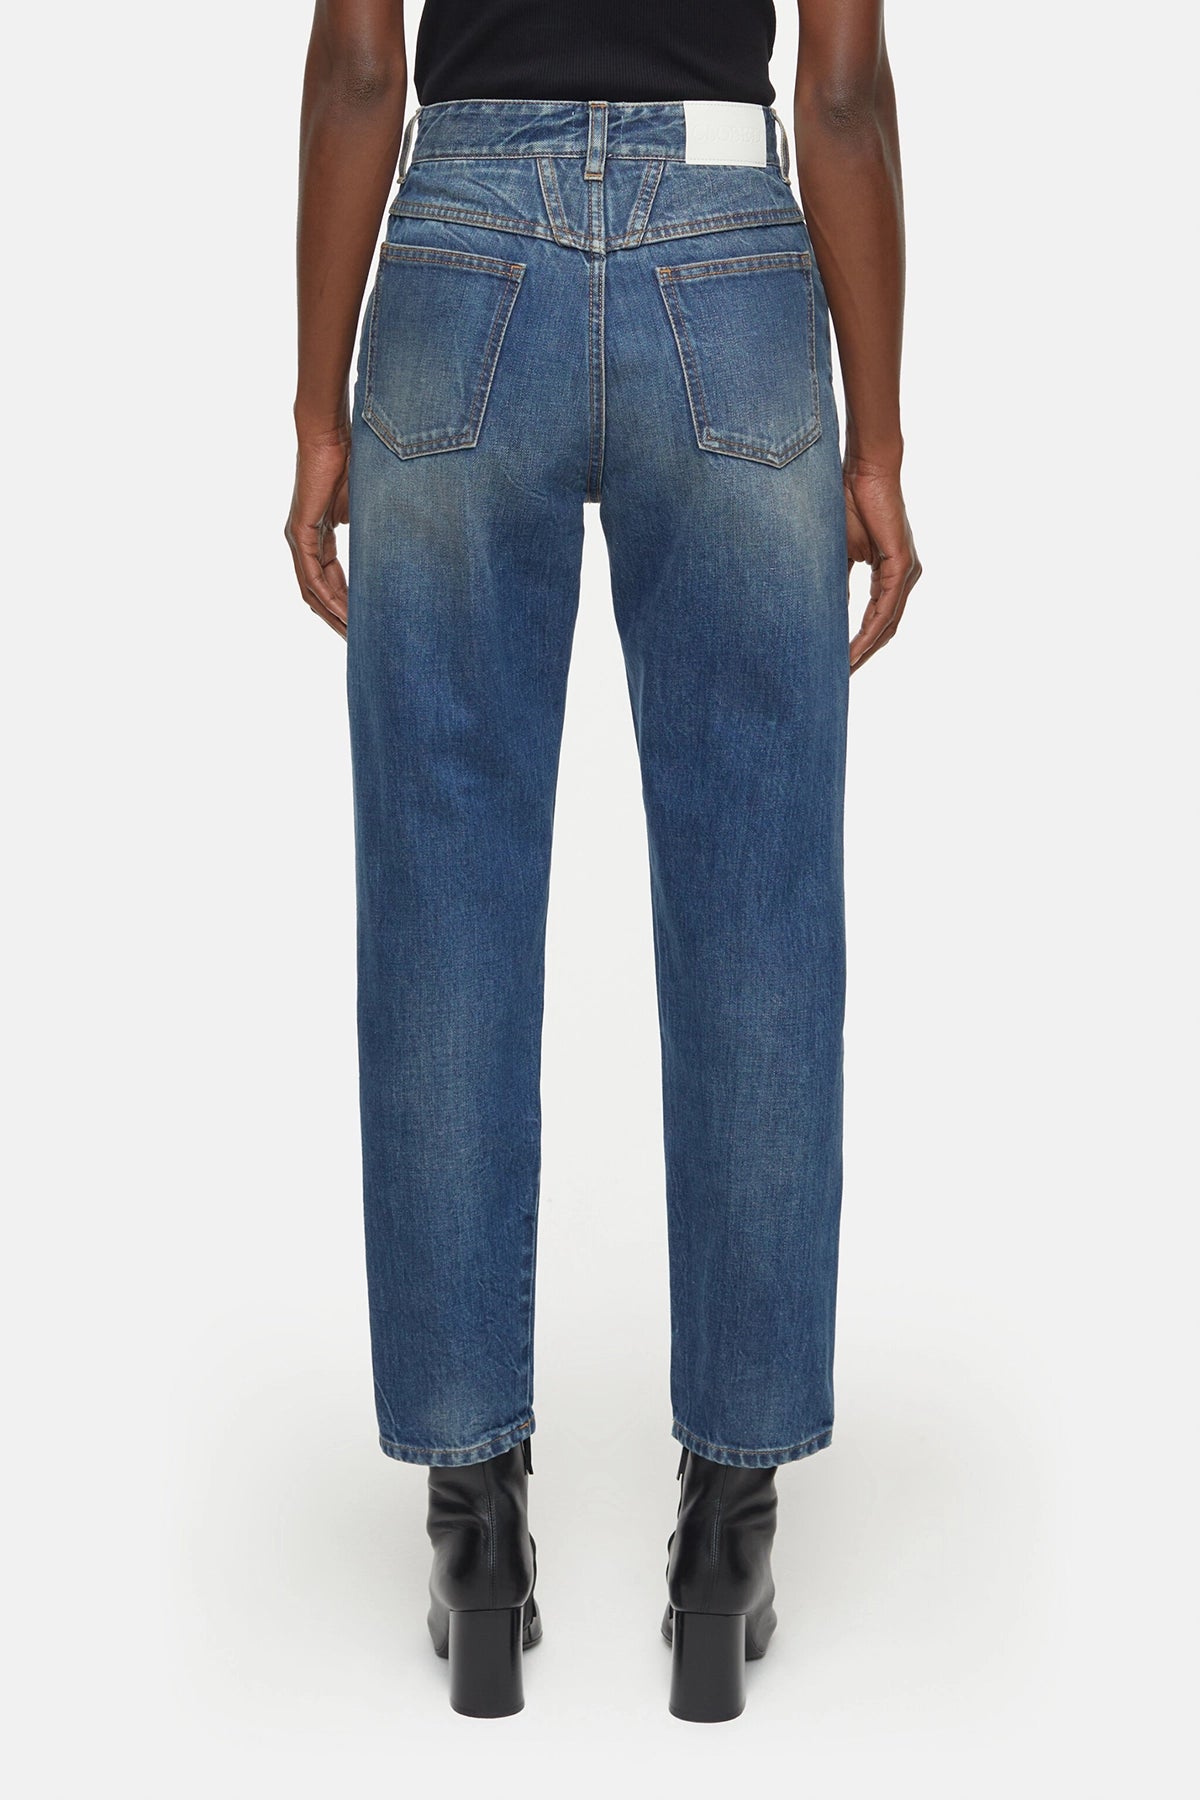 Closed Pedal Pusher Jeans